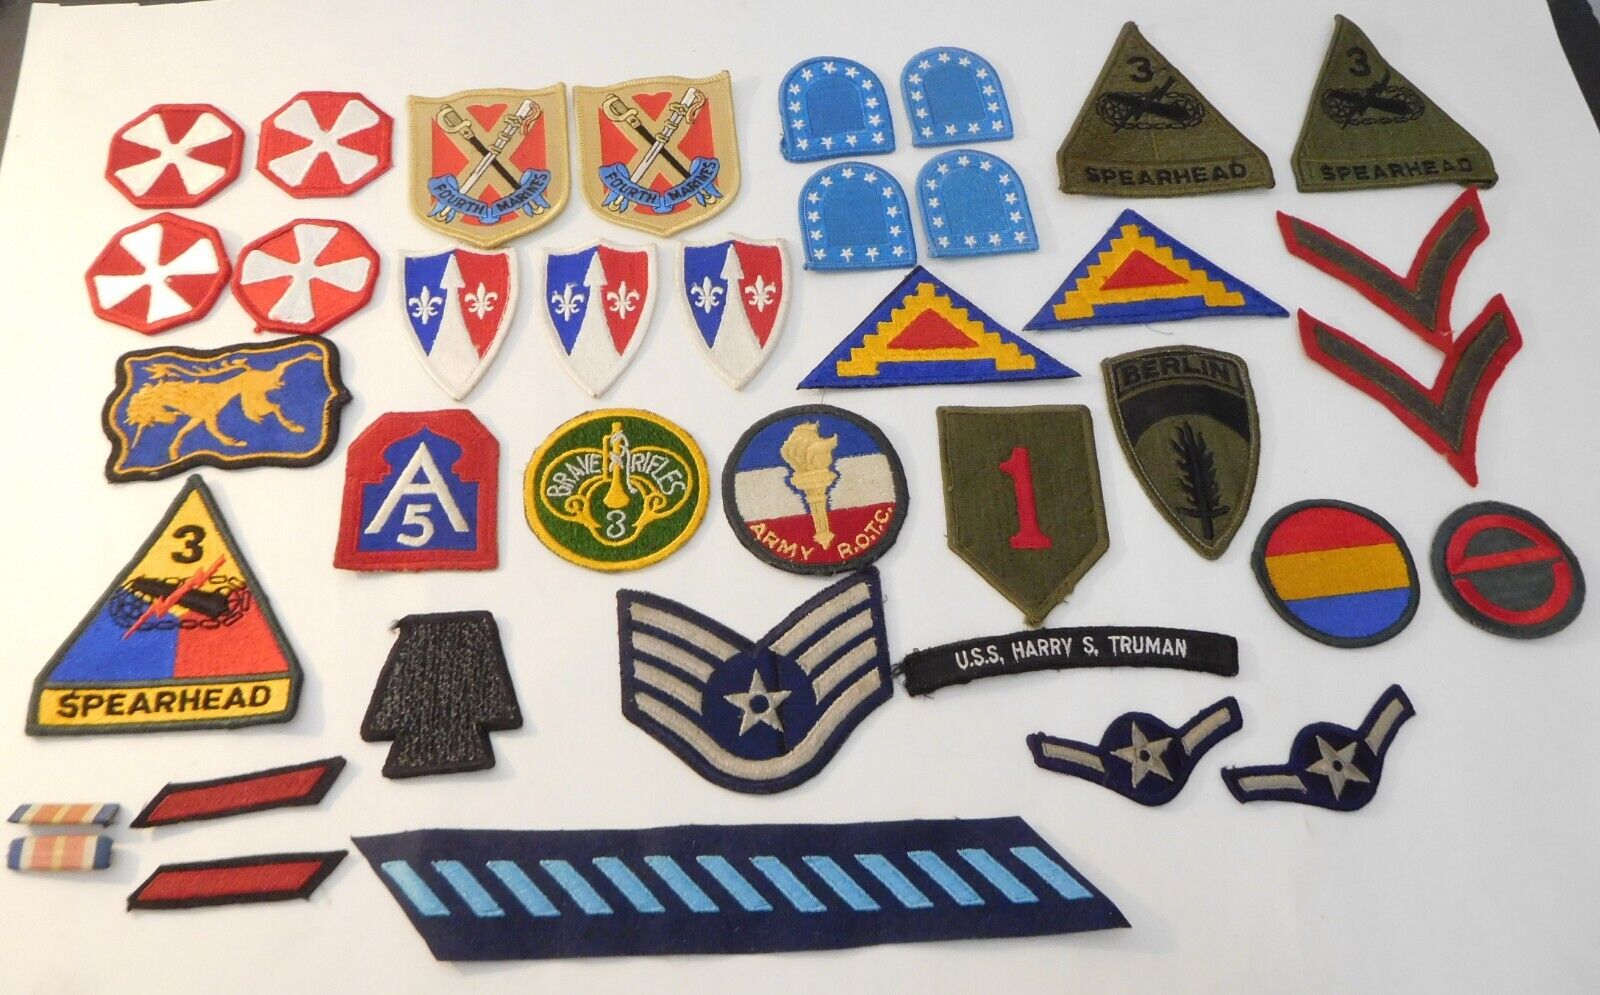 Vintage Military Patches Group of 42 Pieces